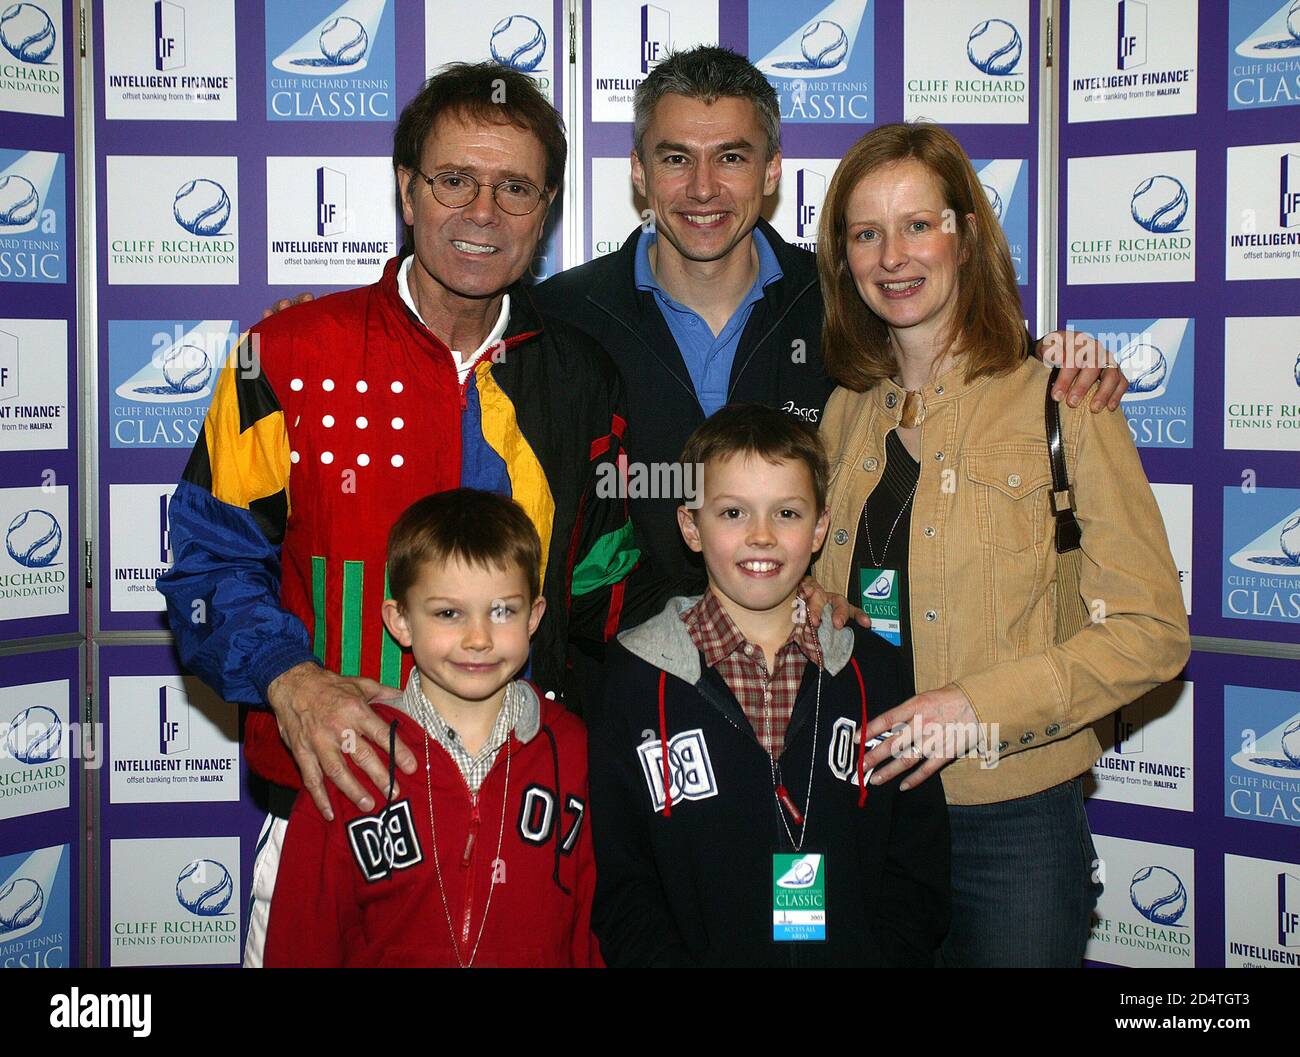 Cliff Richard Tennis Classic tournament  at the Birmingham NIA 20th Dec 2003: Cliff with Jonathan Edwards + his wide Alison and sons Sam & Nathan Stock Photo